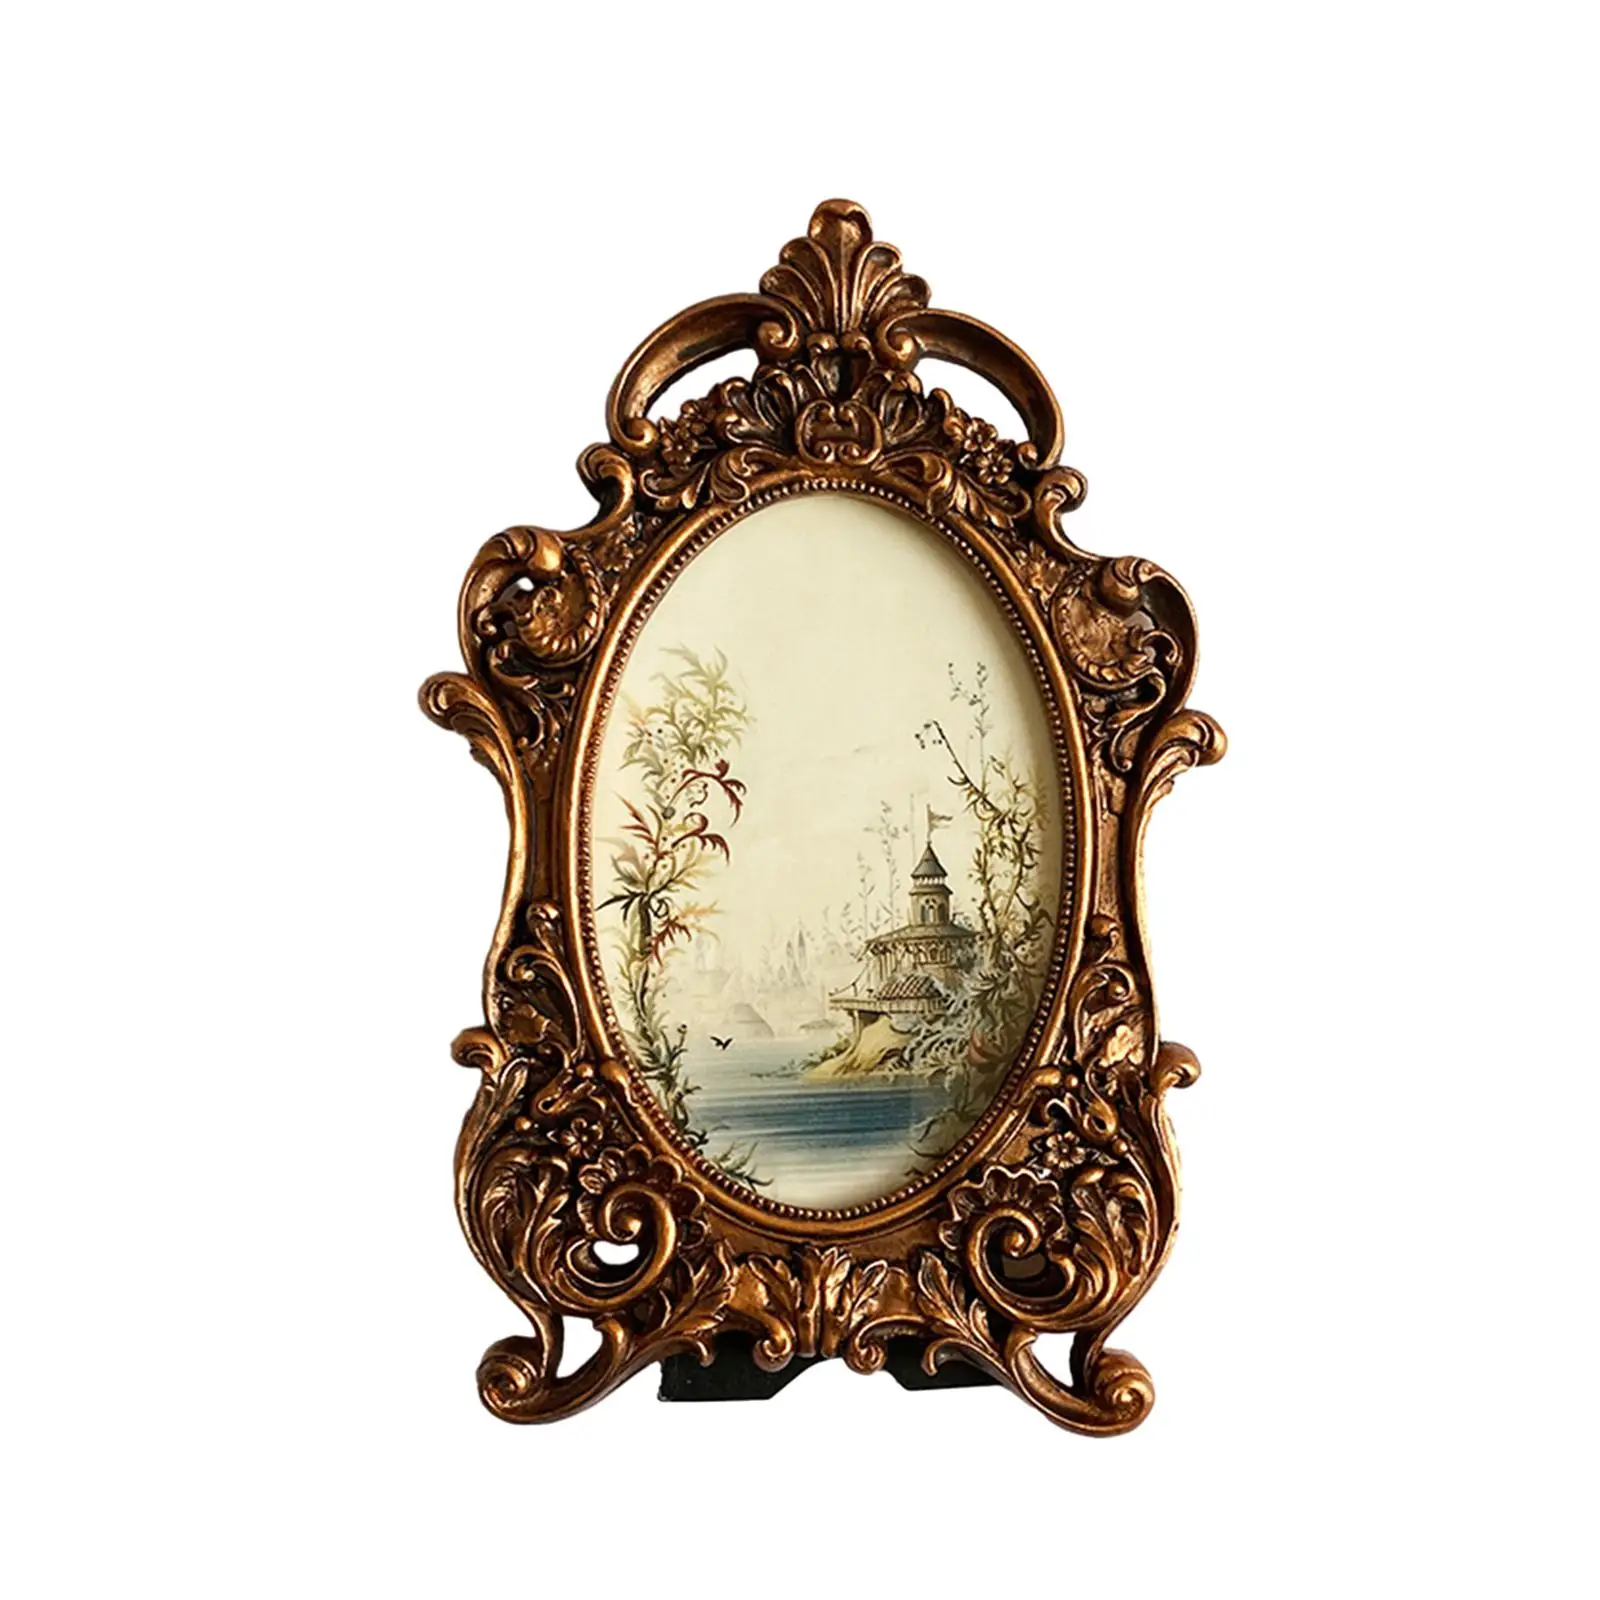 Vintage Picture Frame Decorative Photo Holder Antique Resin Photo Gallery Art Photo Picture Holder for Hallway Table Decoration